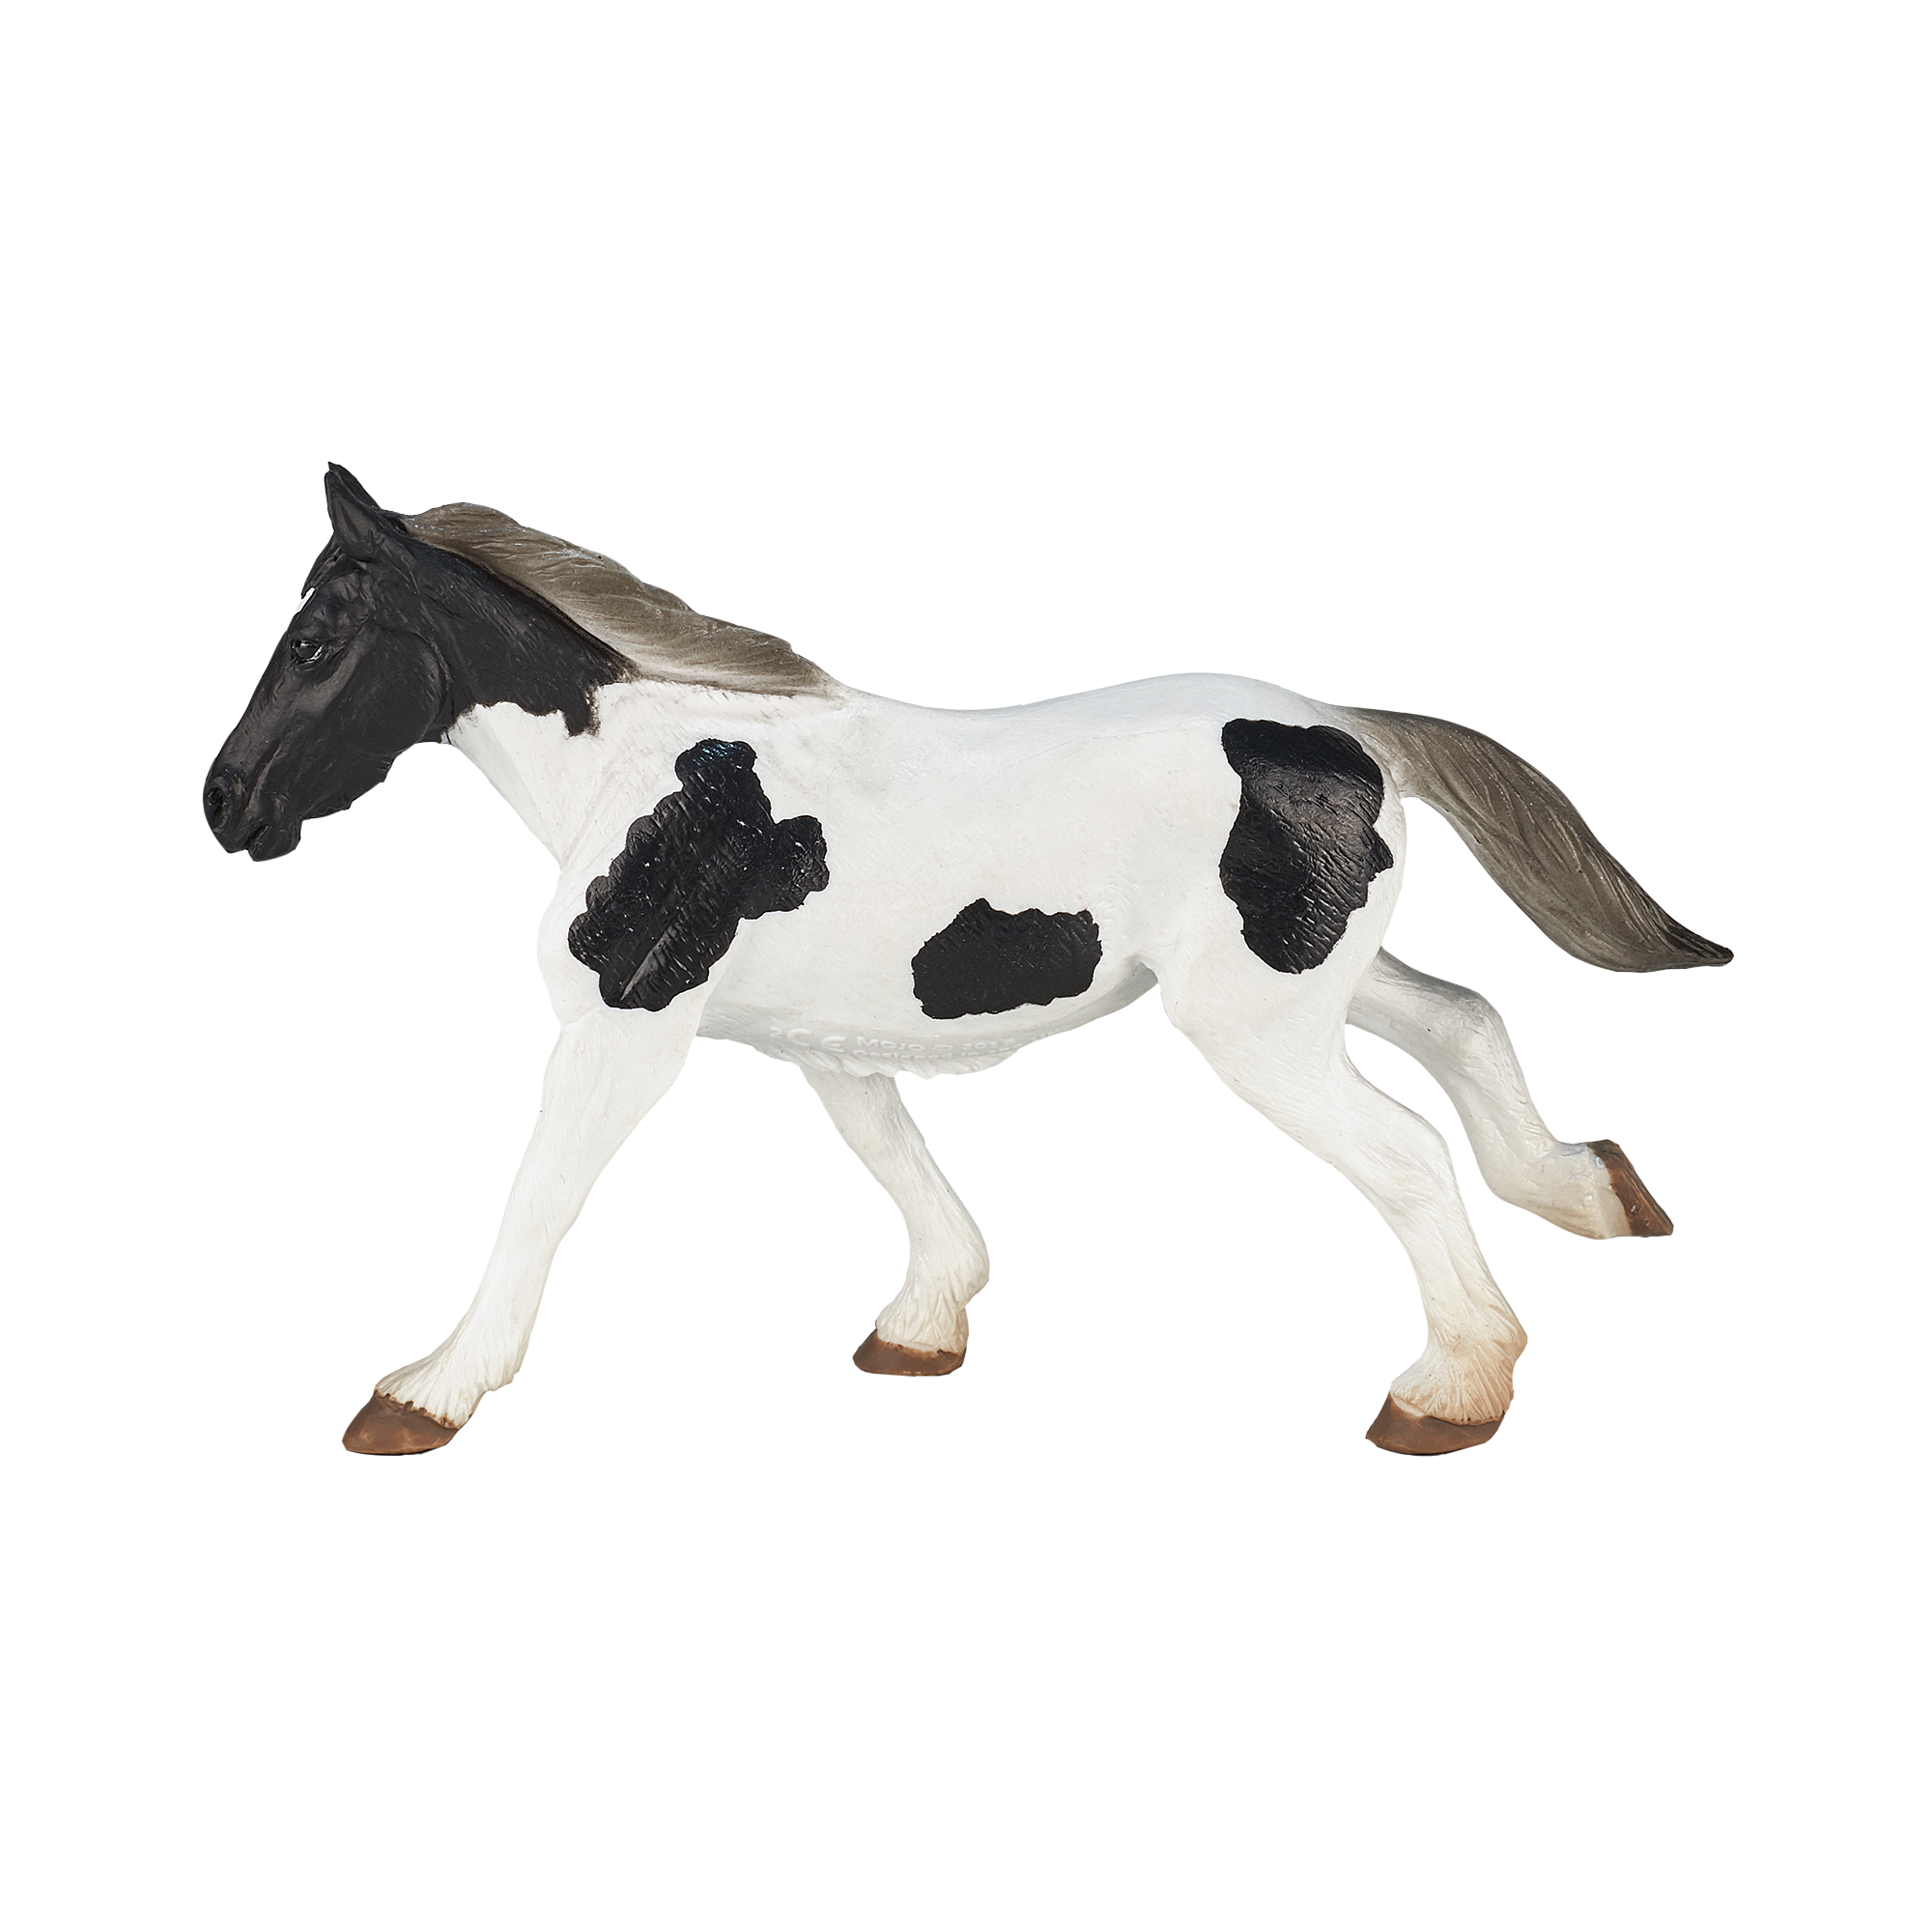 https://www.planethappy.be/resize/387219_14420013220511.png/mojo-horses-cheval-jouet-tinker-yearling-387219.png